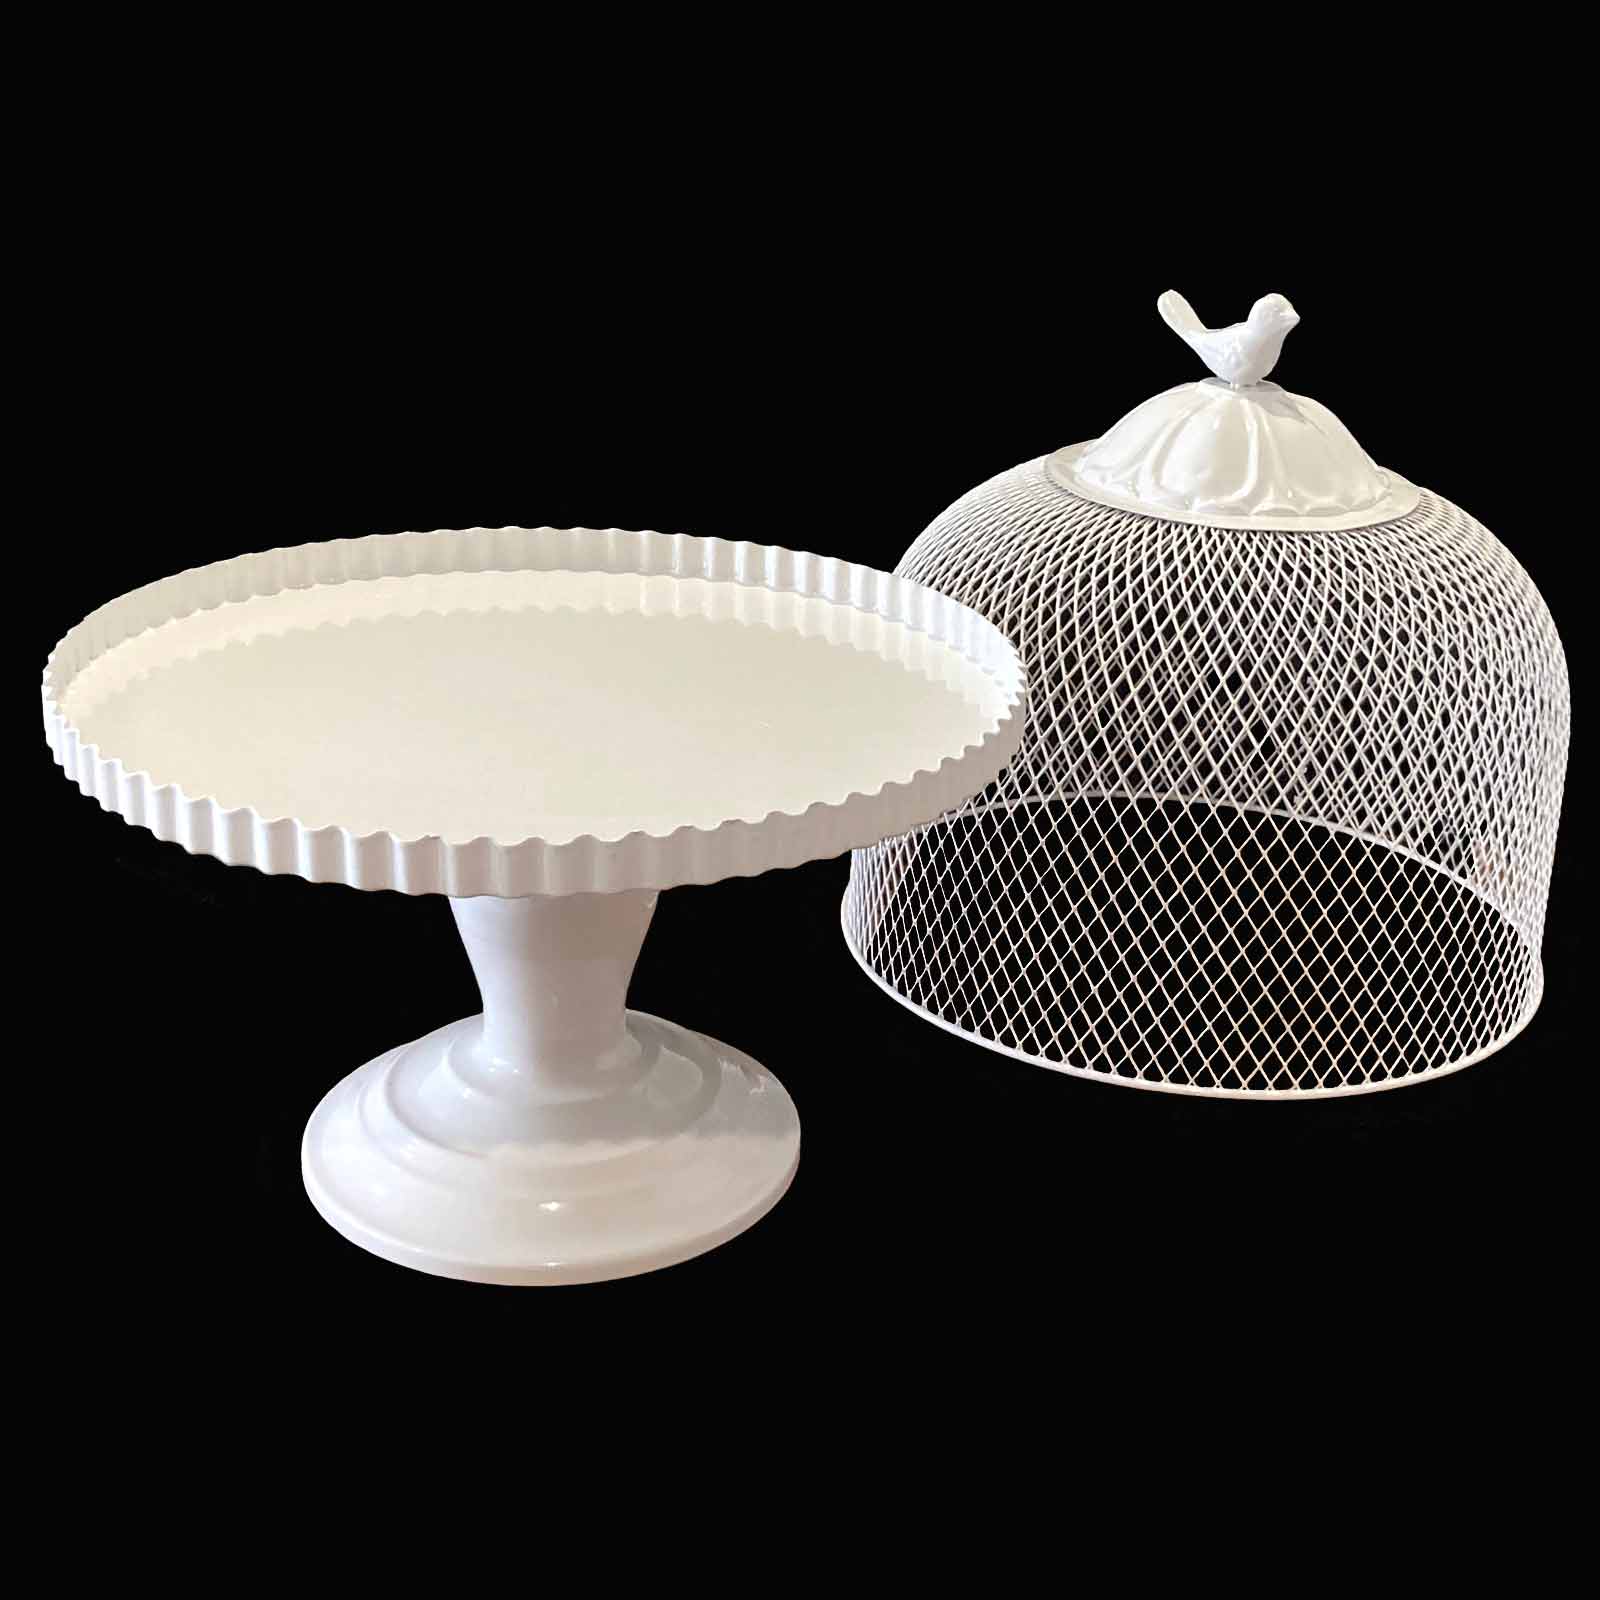 White Metal Cake Stand with Mesh Cover